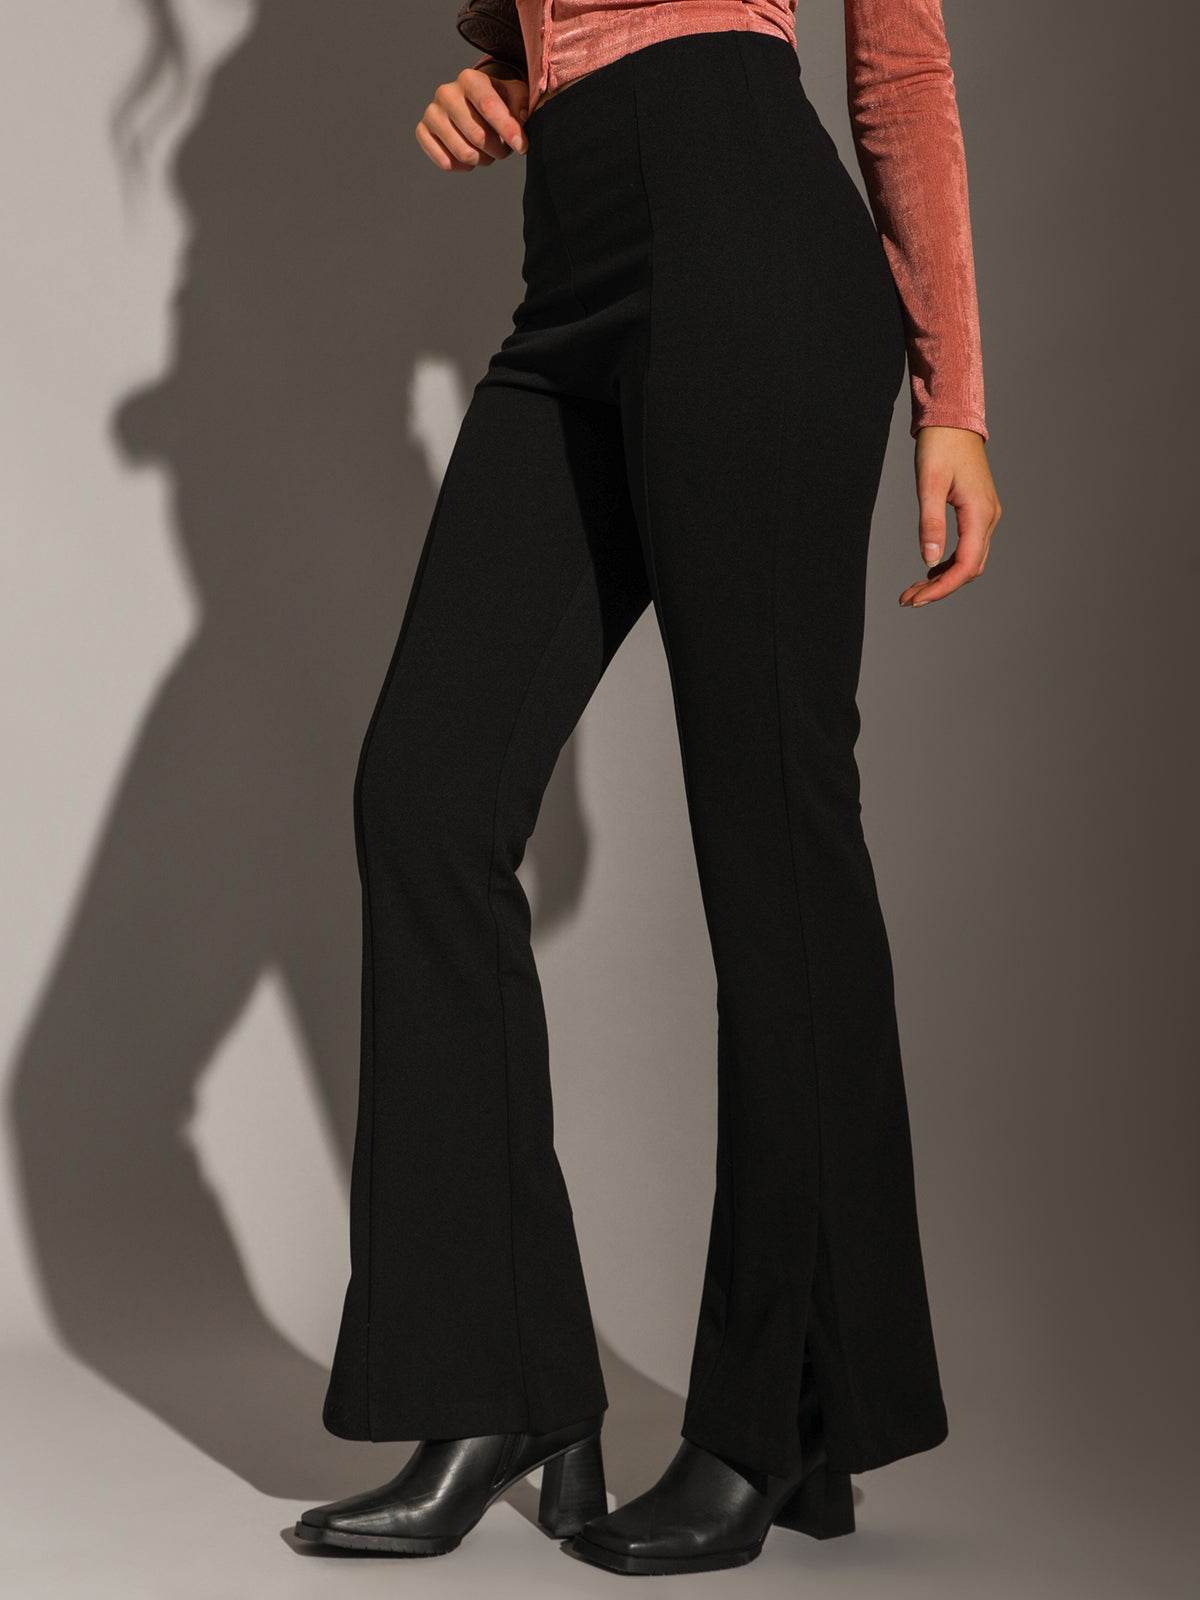 Alexia Flared Crepe Pants in Black